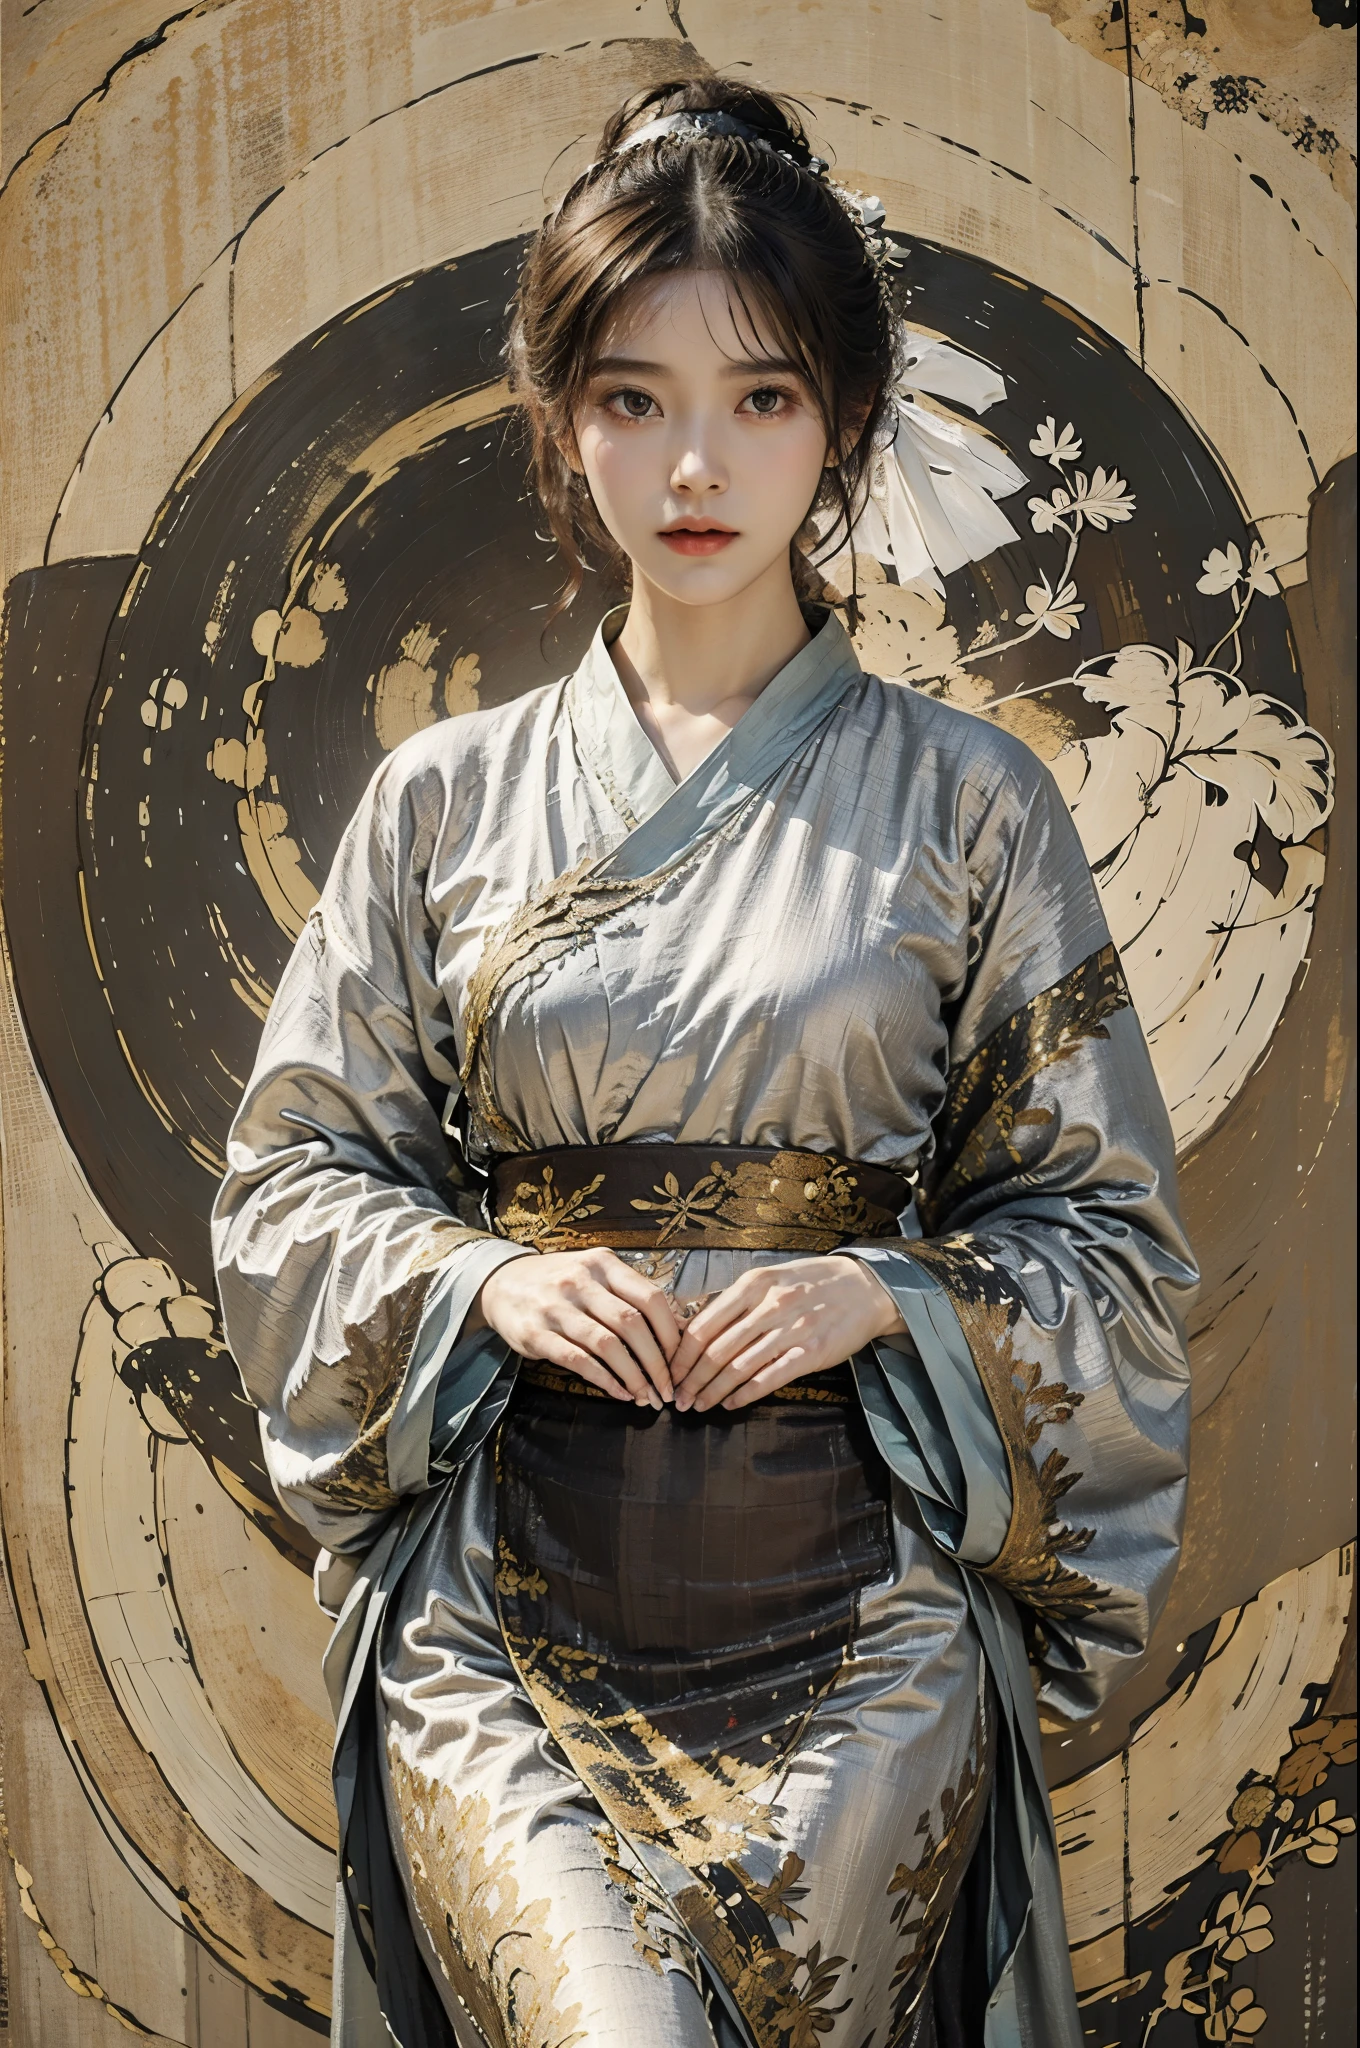 (linen texture:1.1),1 girl,hanfu,Clothes are rough,Silver foil texture applied to clothes,The rough texture of silver foil acts on clothes,the effect of linen texture on clothing,Mucha art style,, best quality,masterpiece,(Photorealistic),